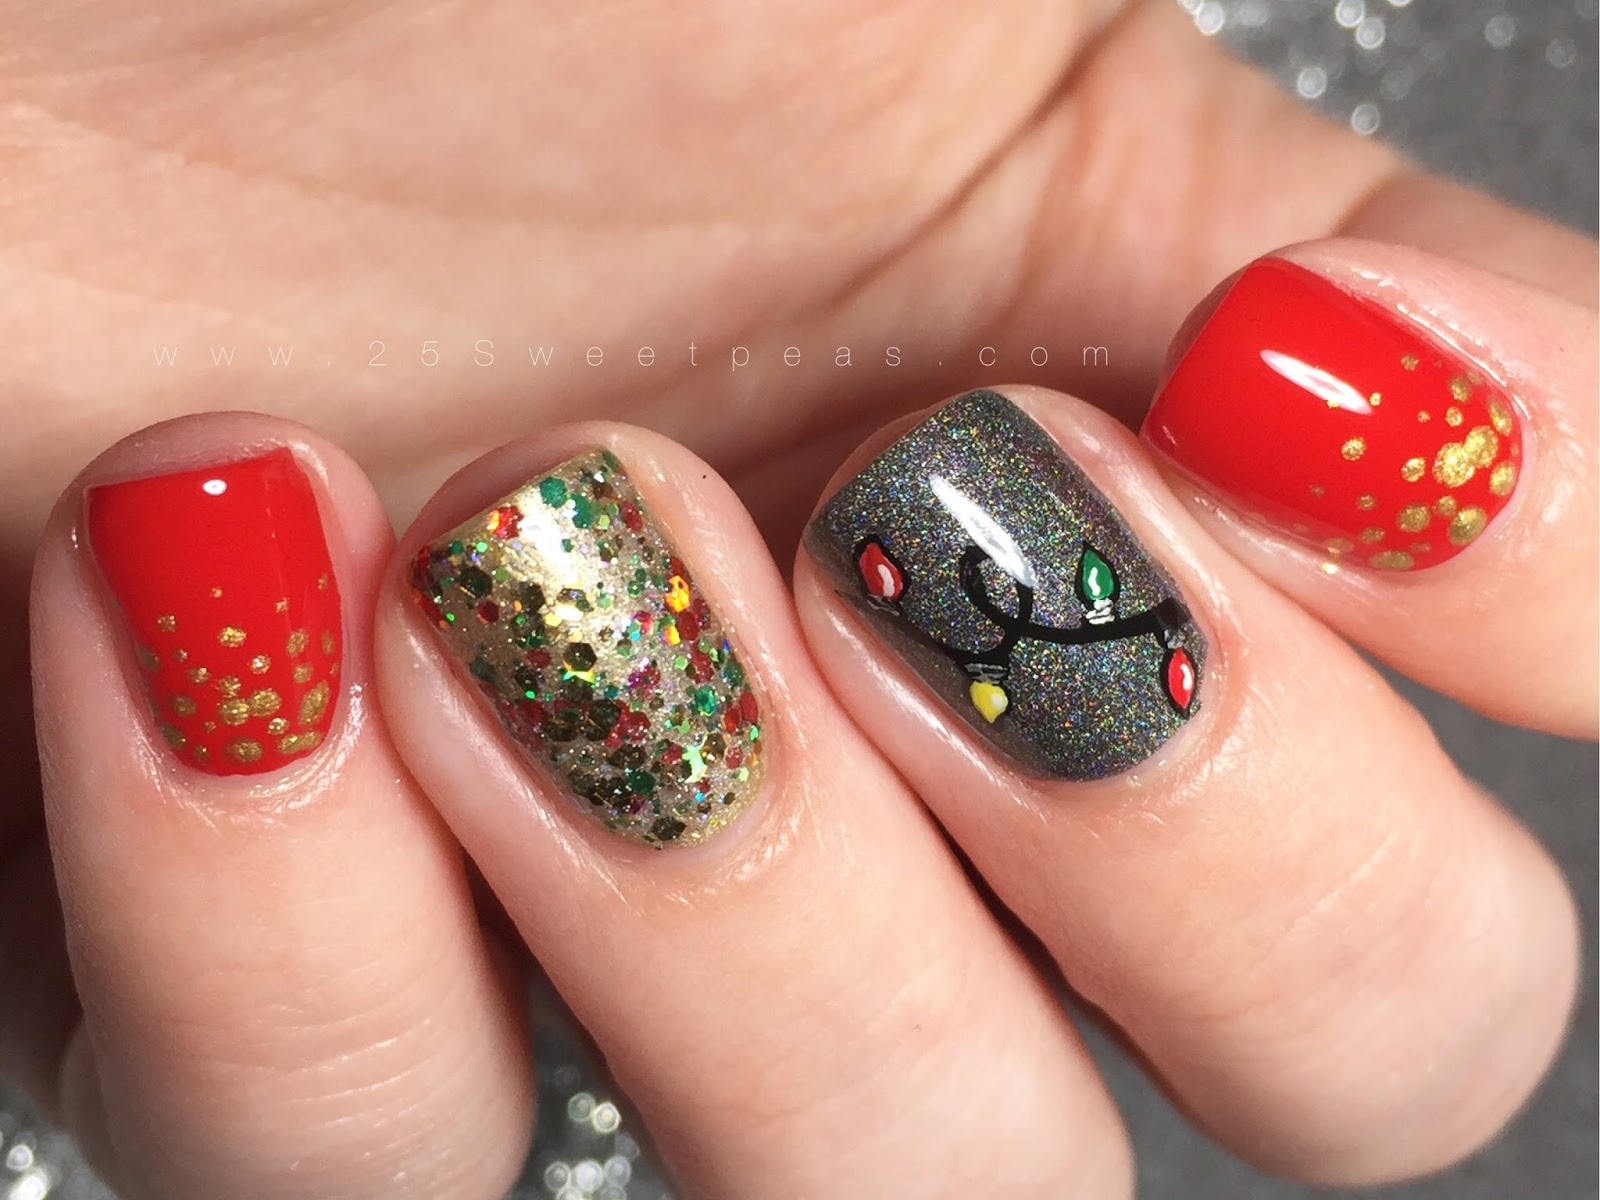 8. "Holiday Lights Nails" - wide 2